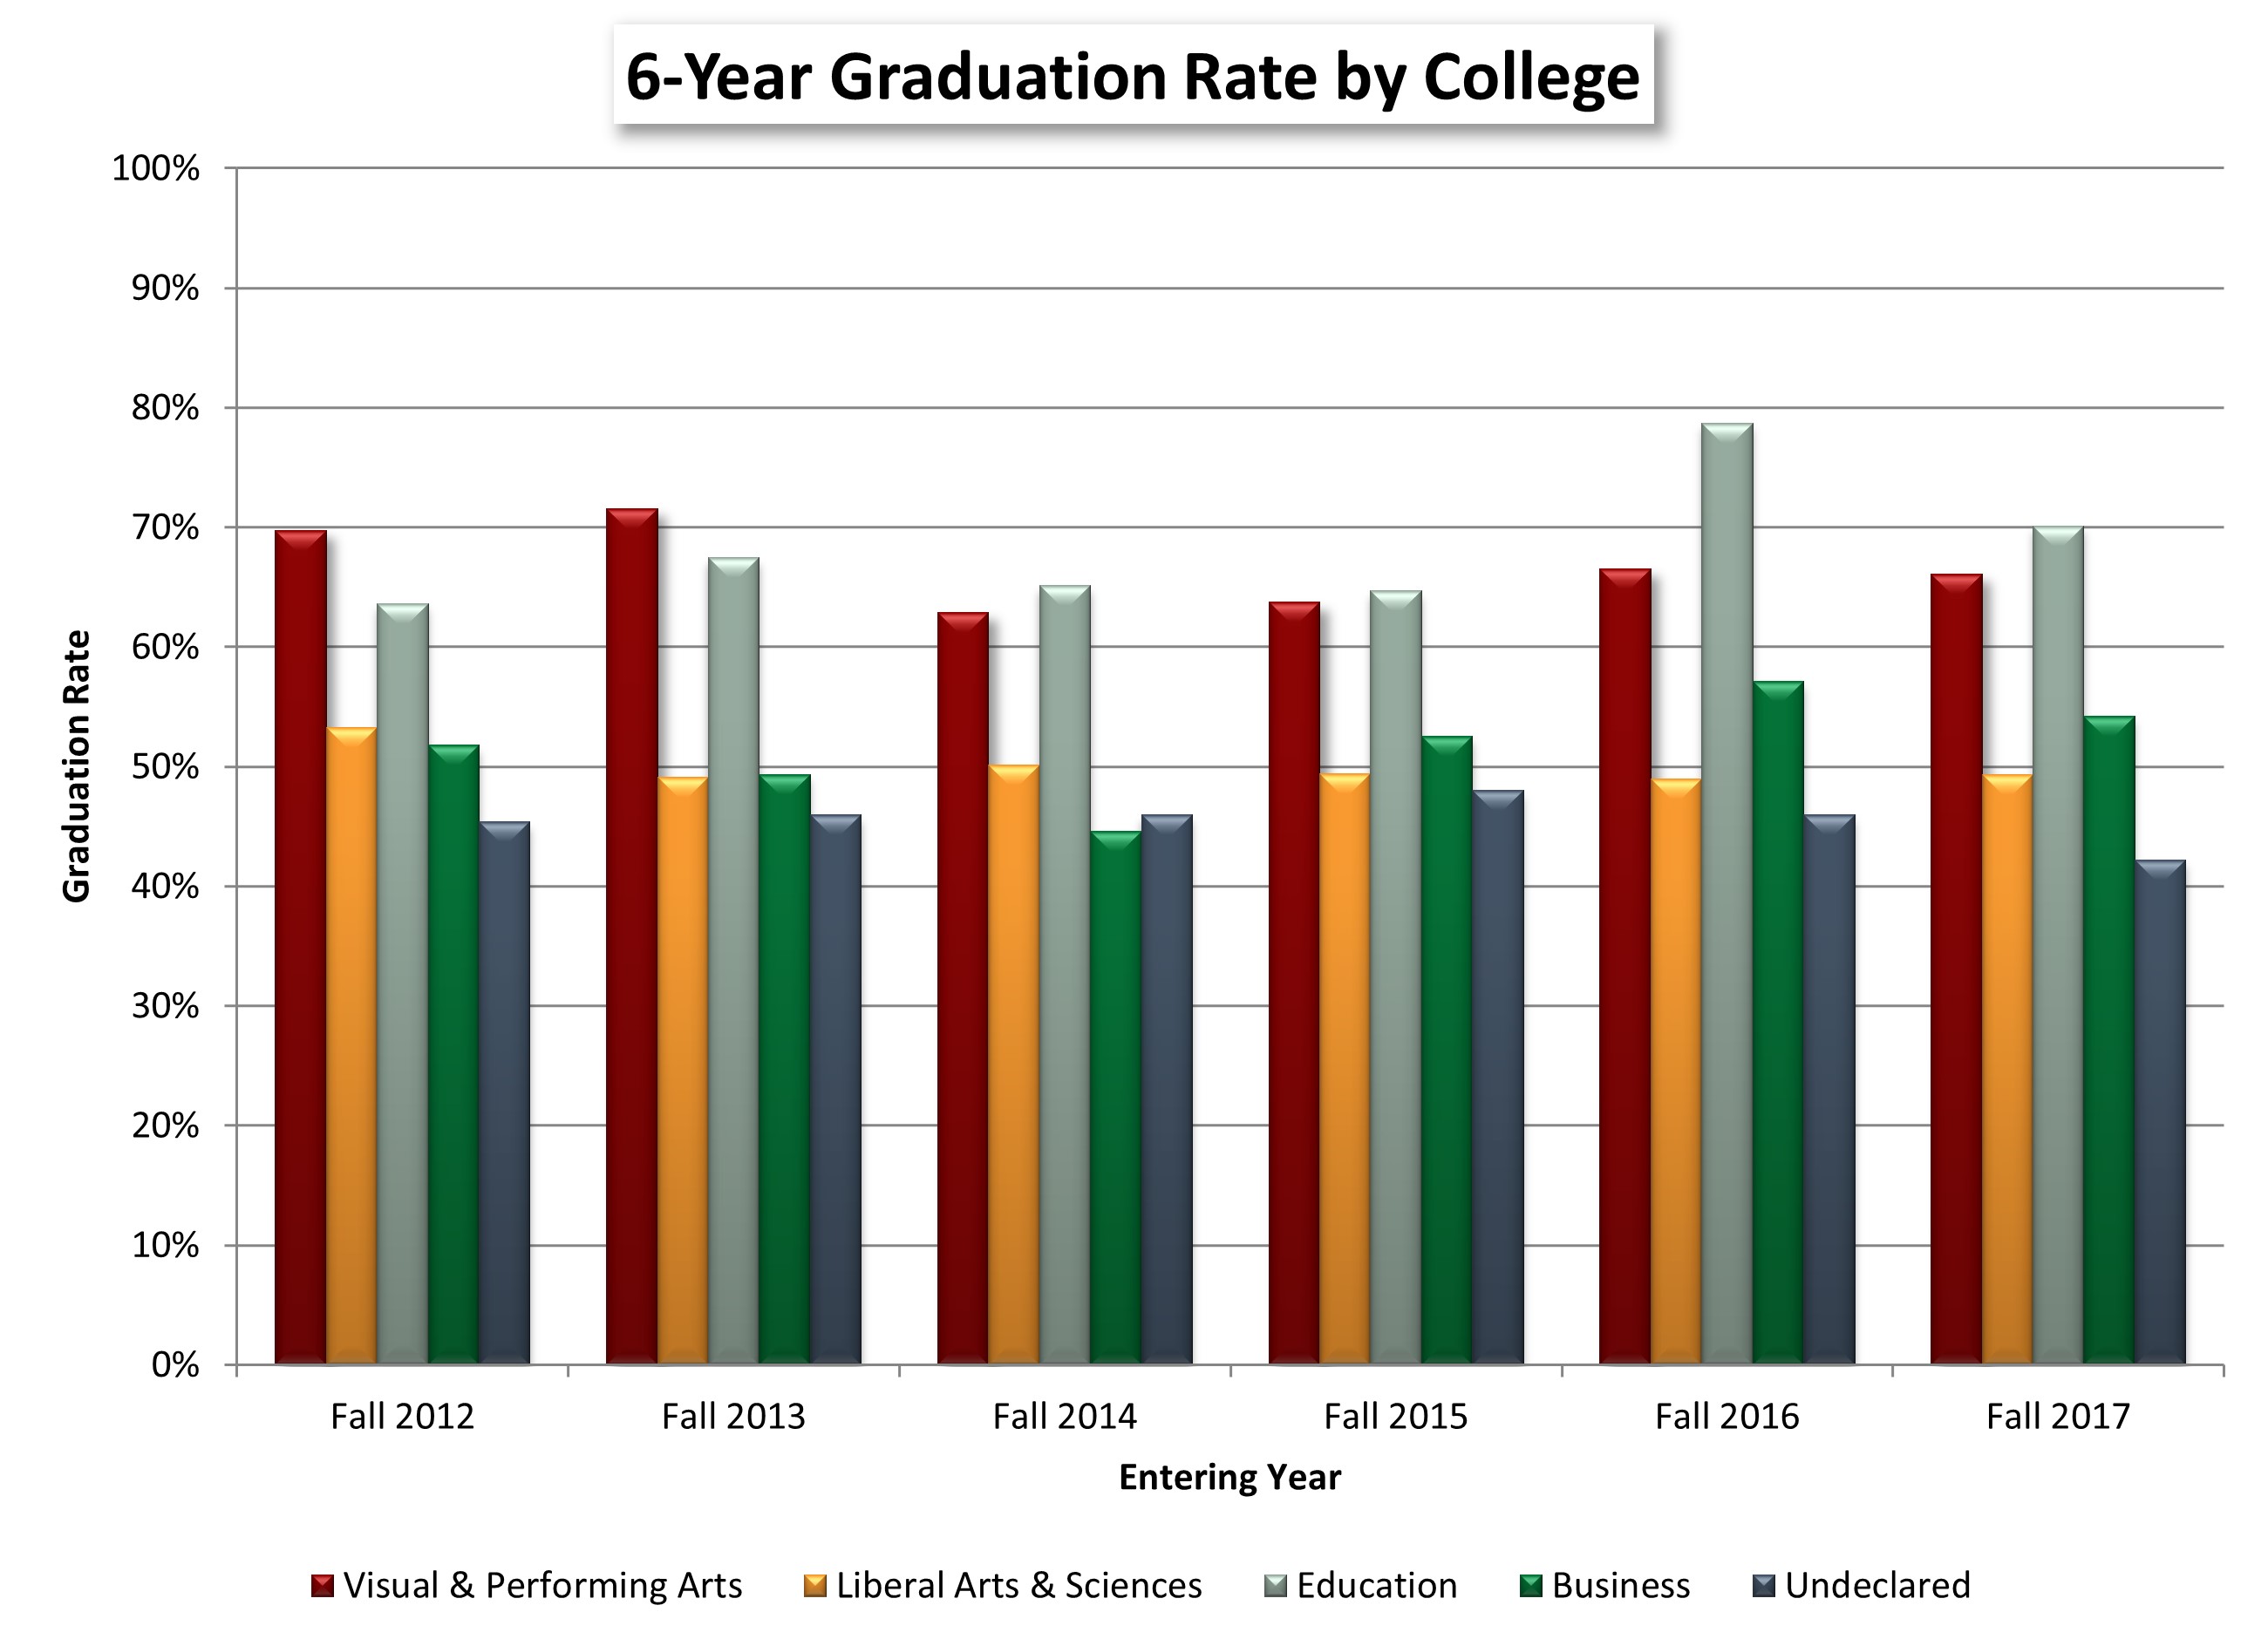 6-Year Graduation Rate by College chart